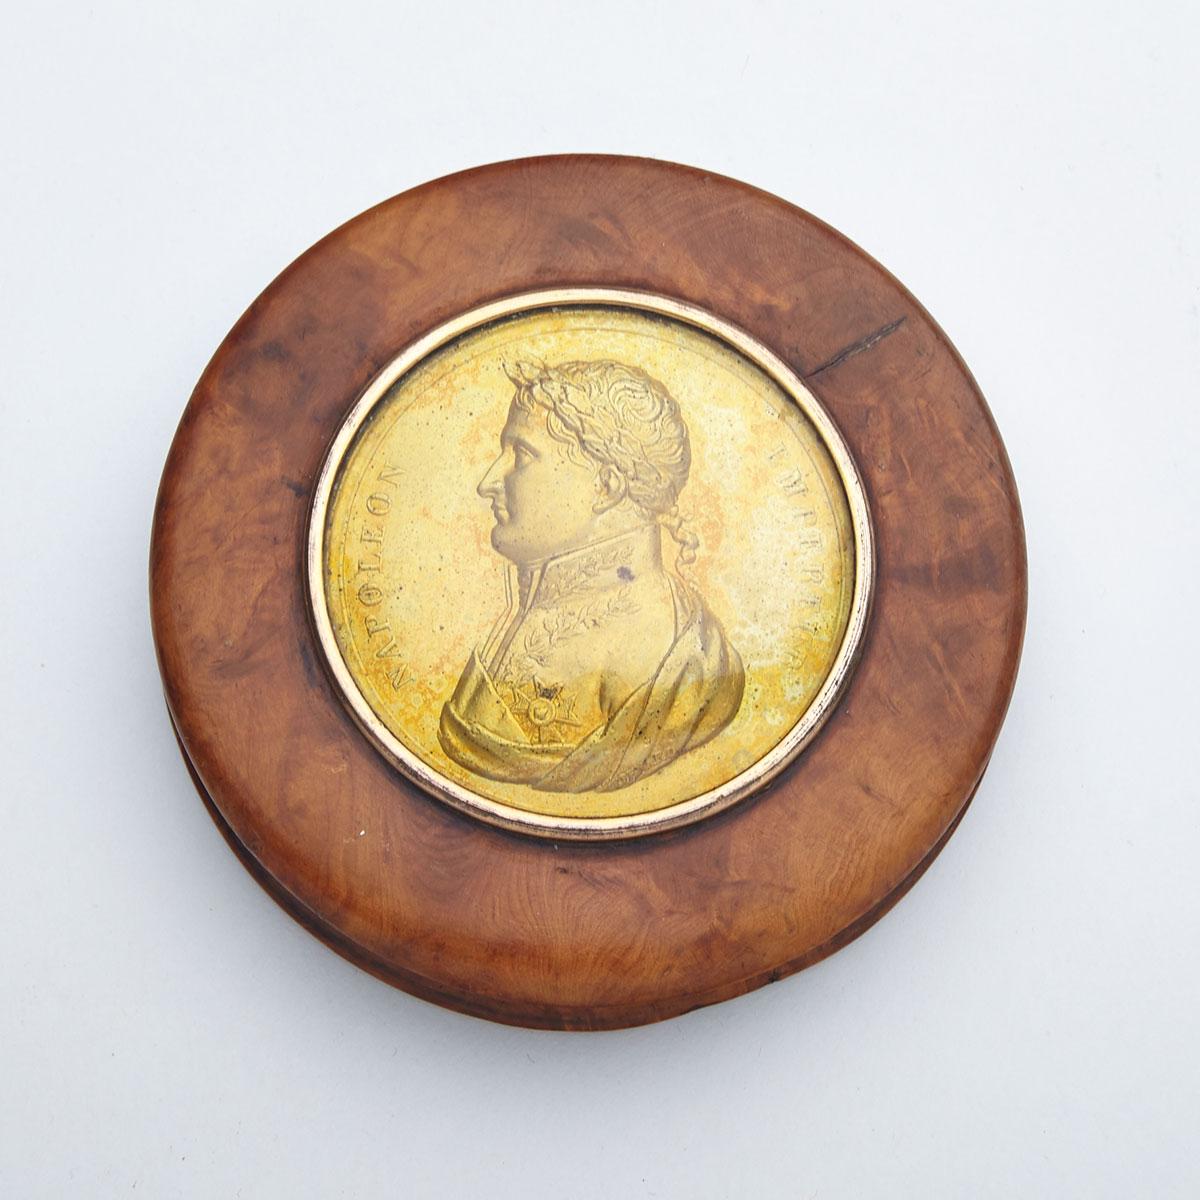 French Turned Burl Wood and Gilt Copper Snuff Box of Napoleonic Interest, mid 19th century